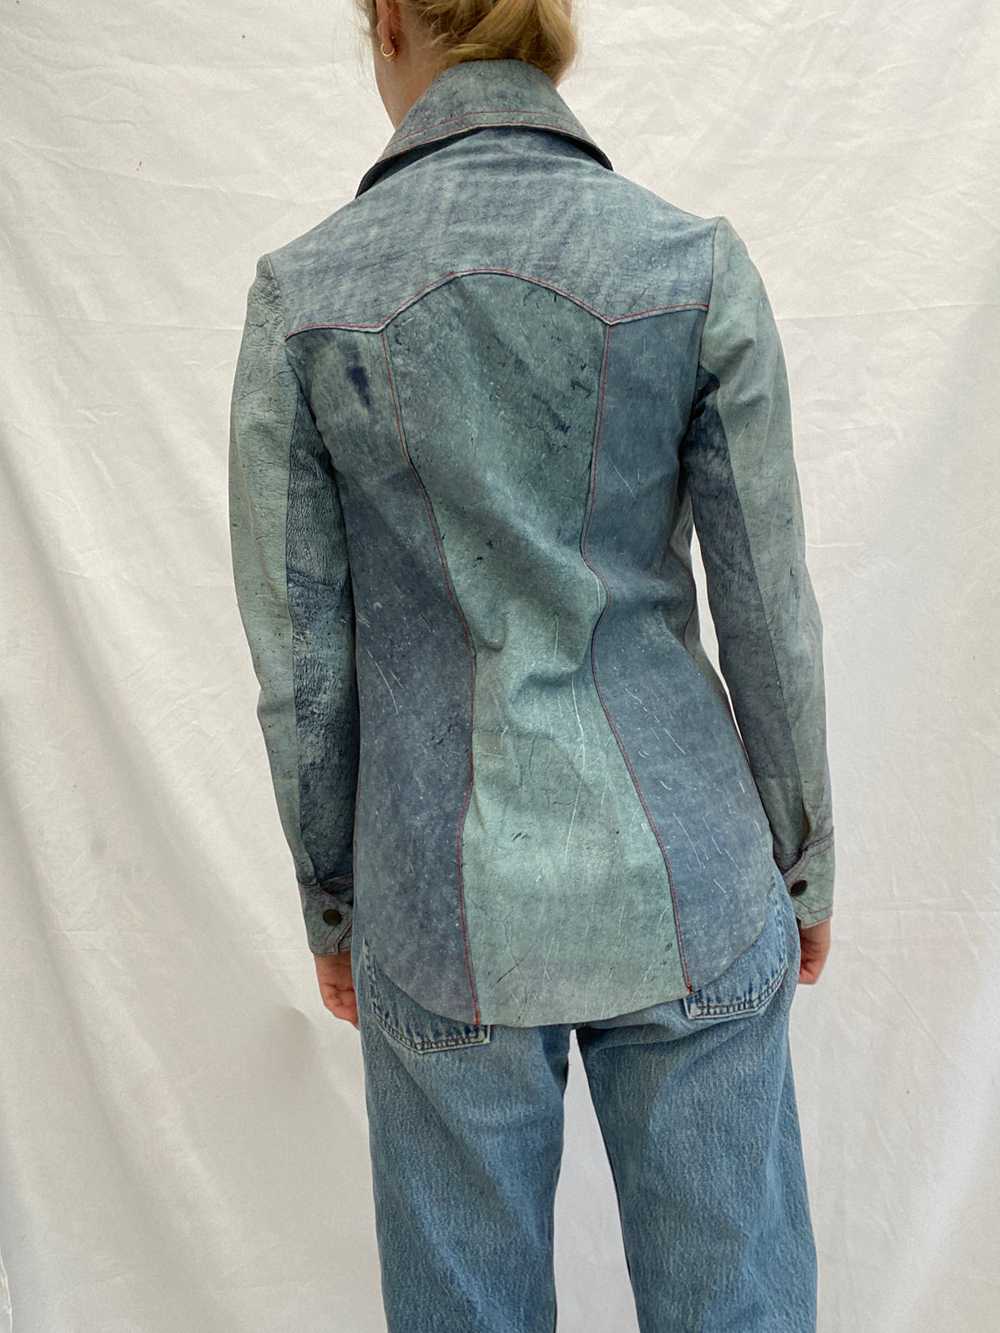 Baby Blue Suede Jacket Shirt with Red Stitching - image 6